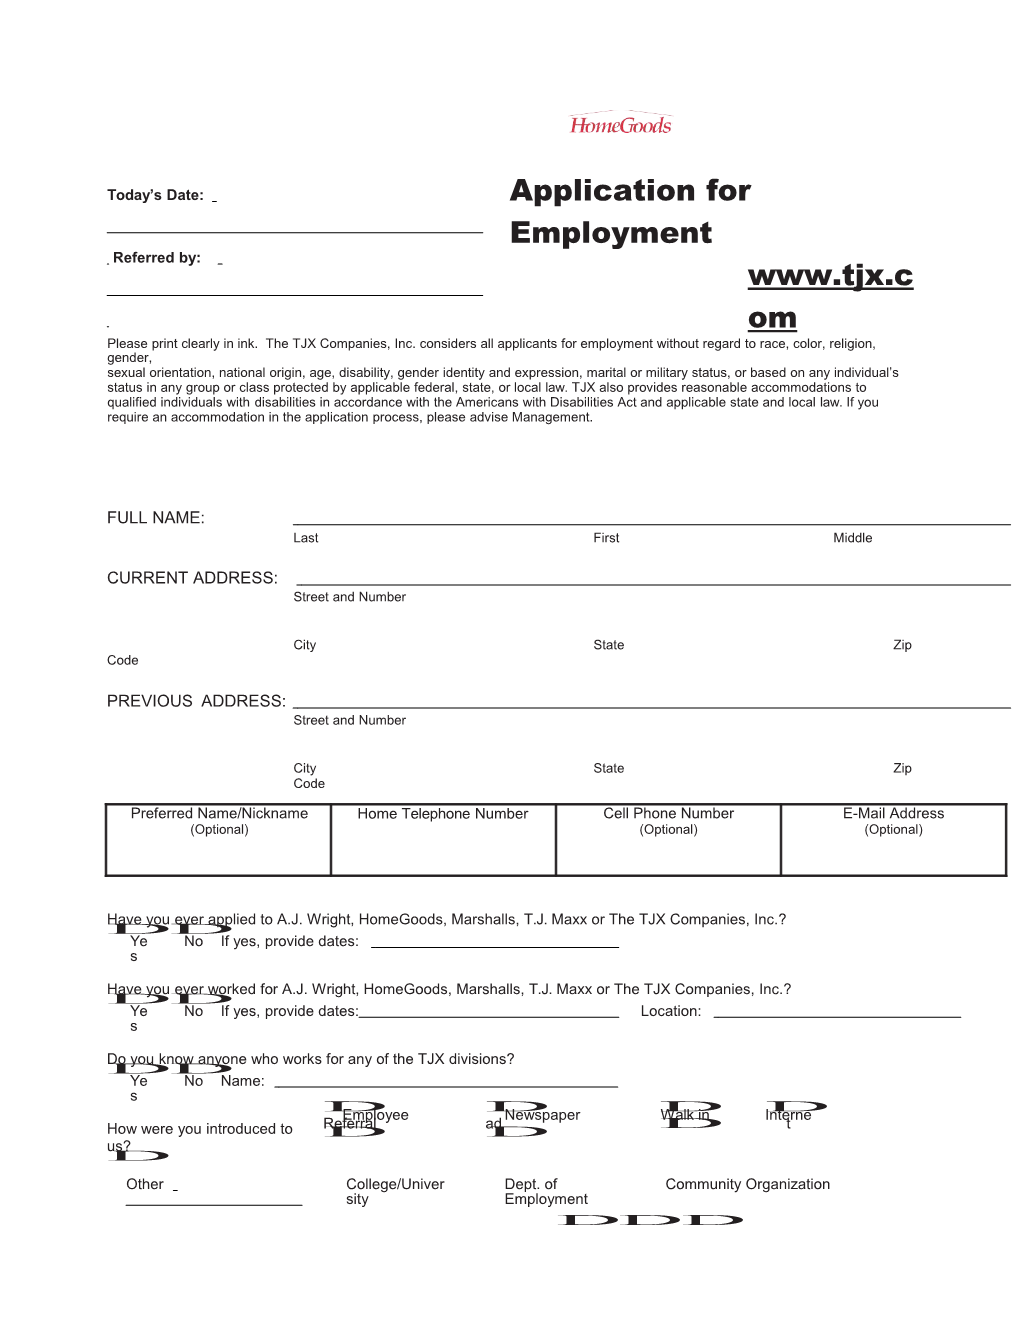 Application Single Pages Rev 10 09.Cdr